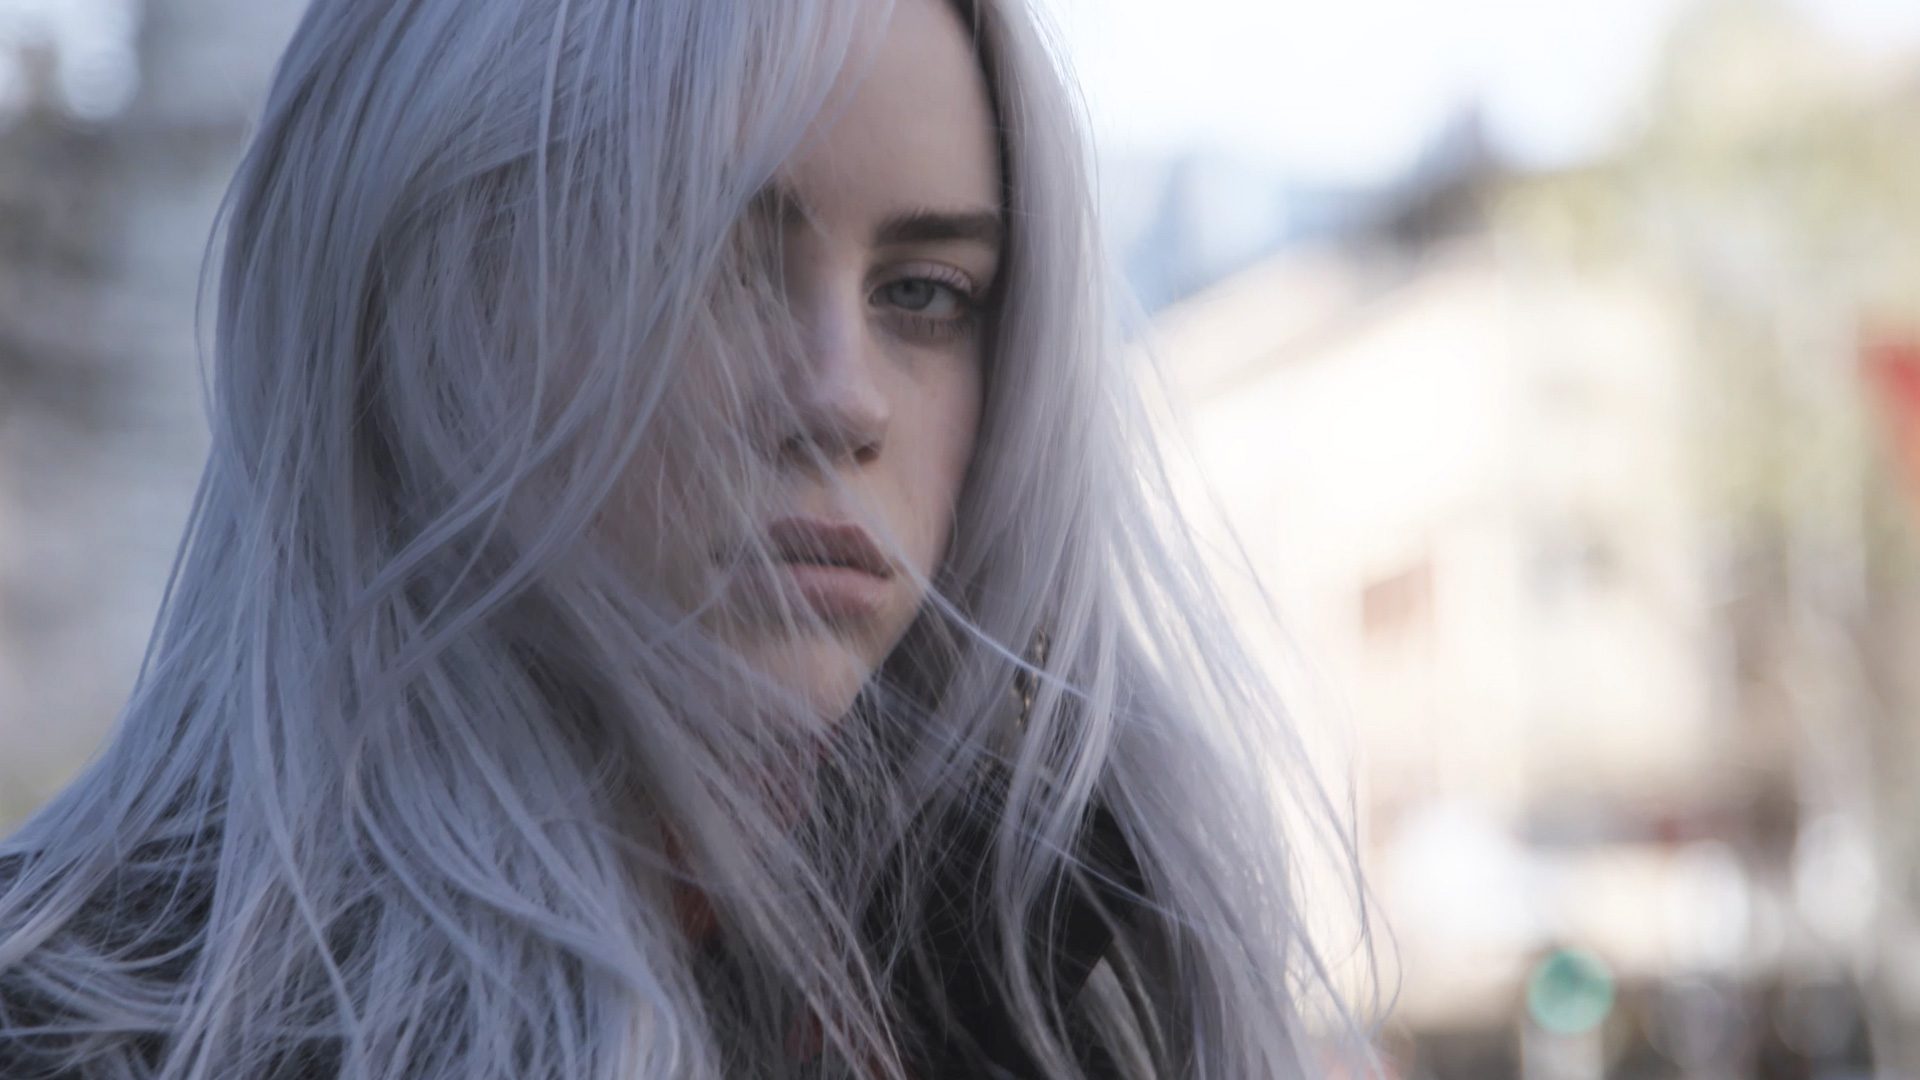 Billie Eilish Monochrome 2021 Wallpaper HD Celebrities 4K Wallpapers  Images and Background  Wallpapers Den